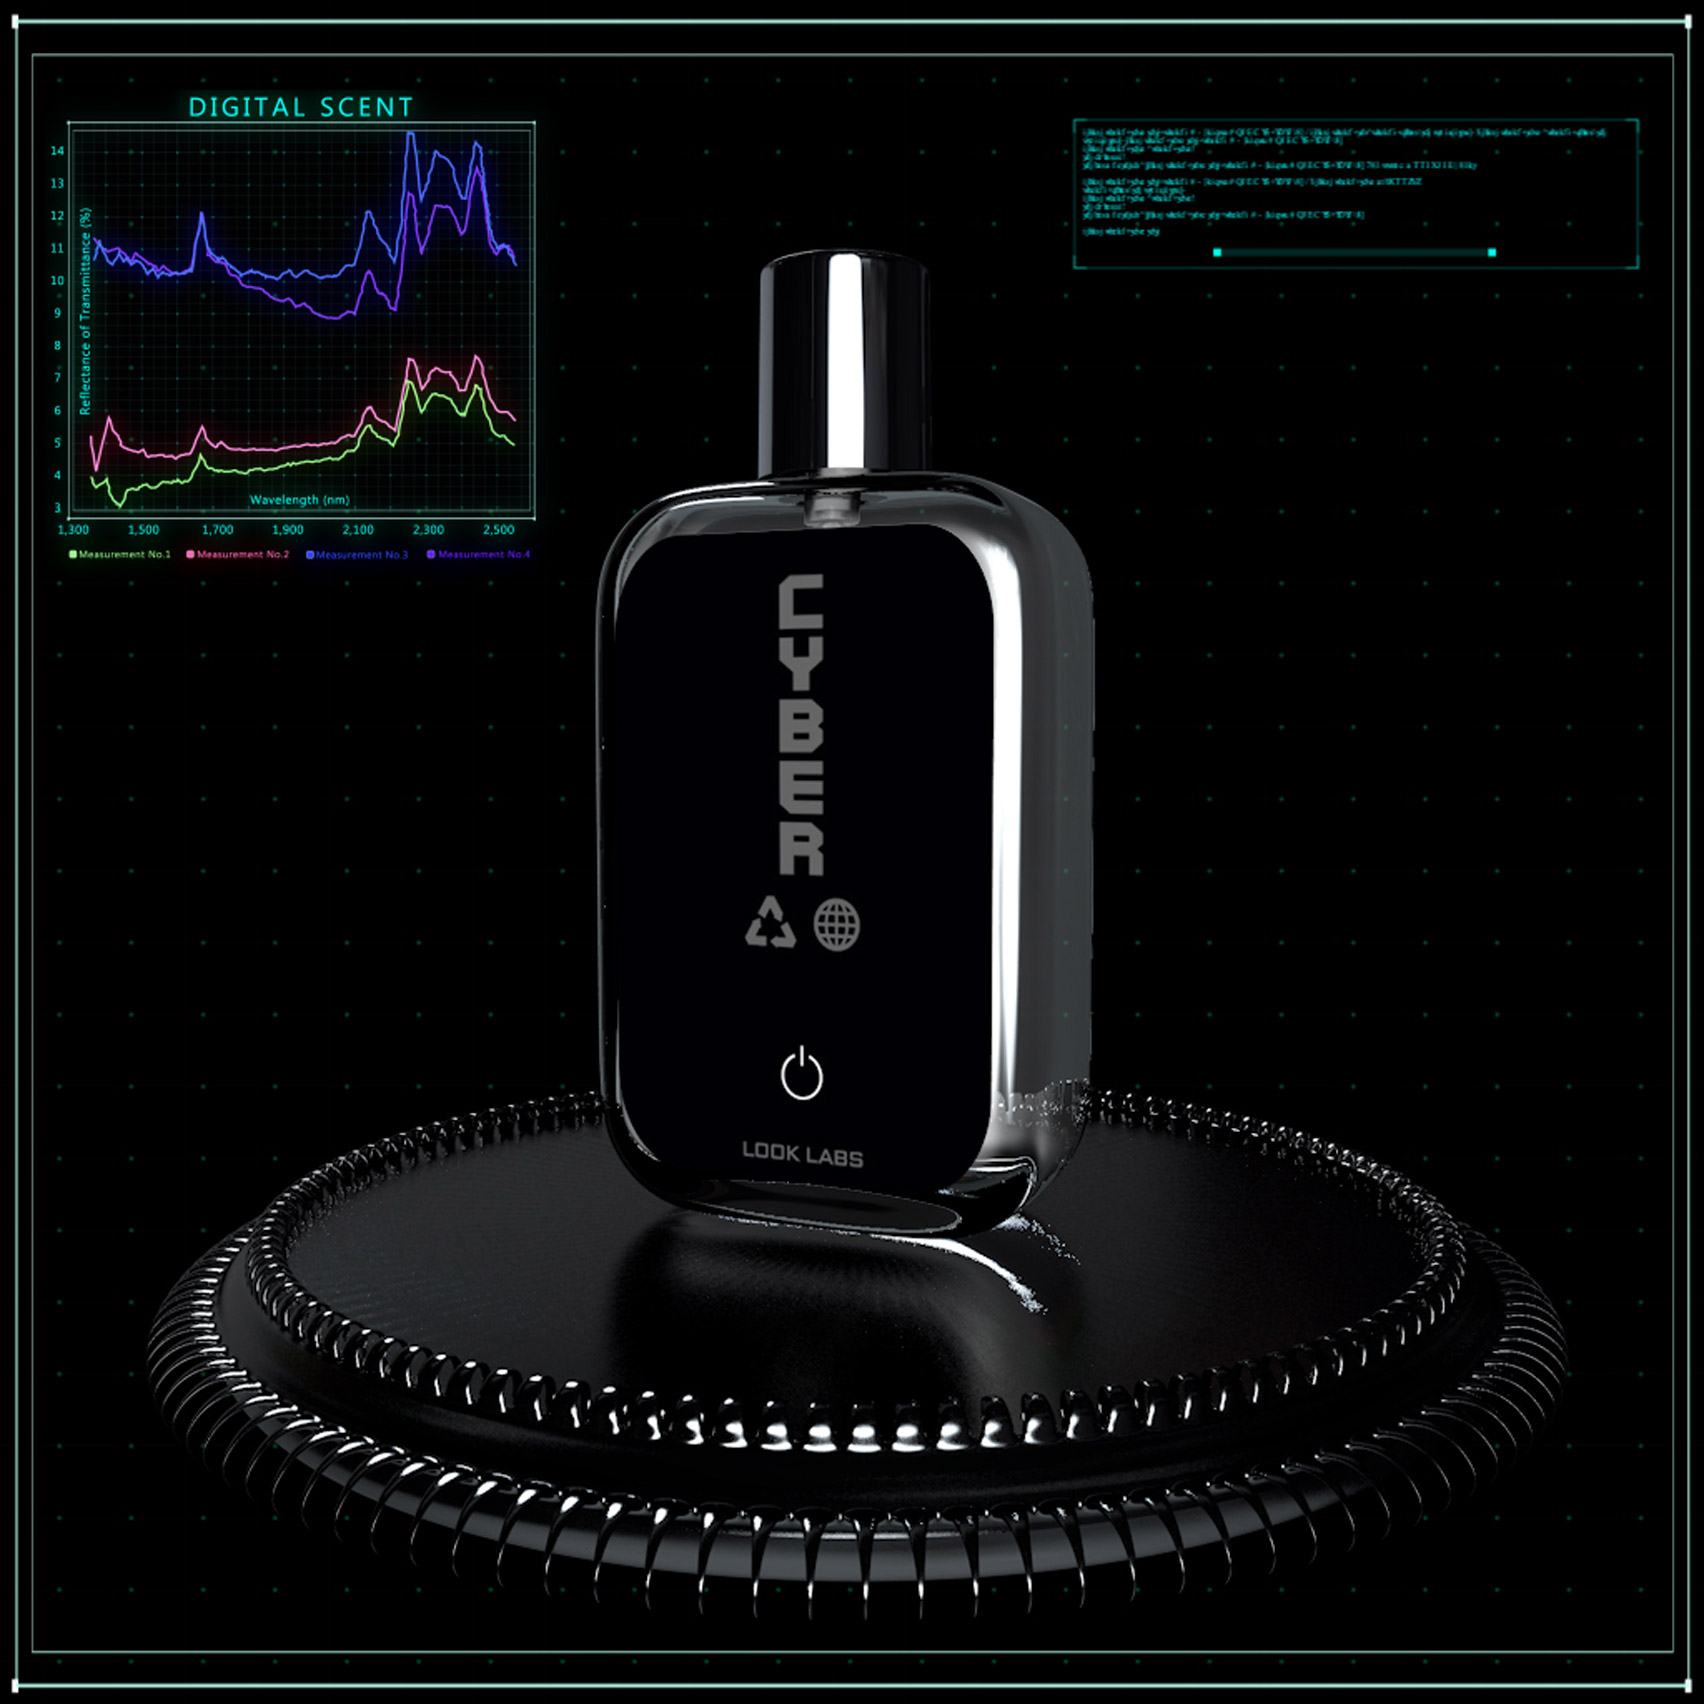 Look Labs creates world's first digital fragrance as NFT